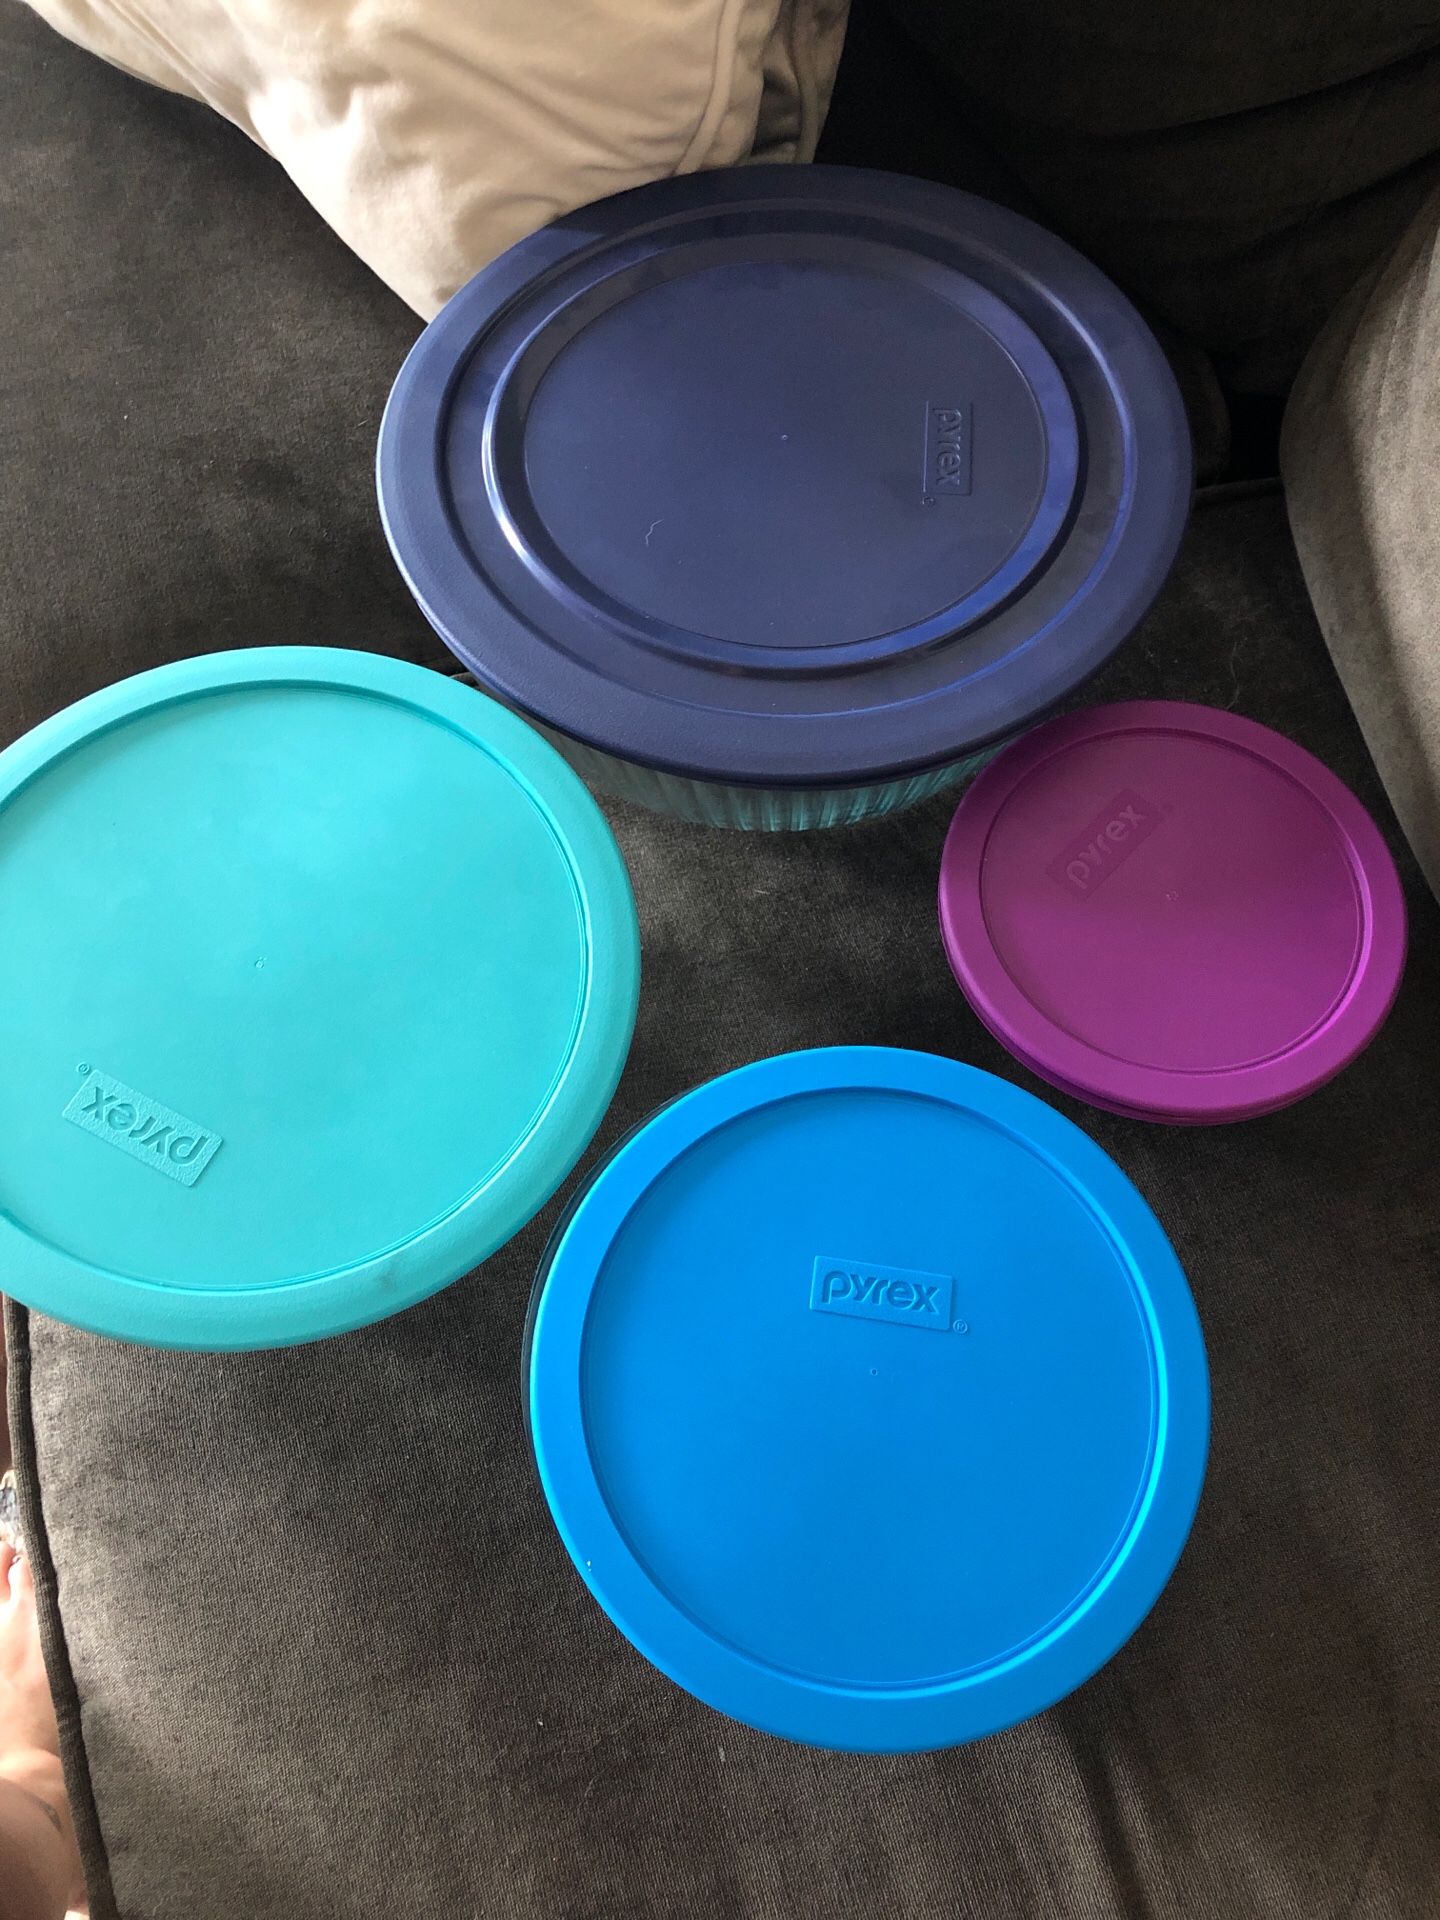 Pyrex mixing bowls with lids